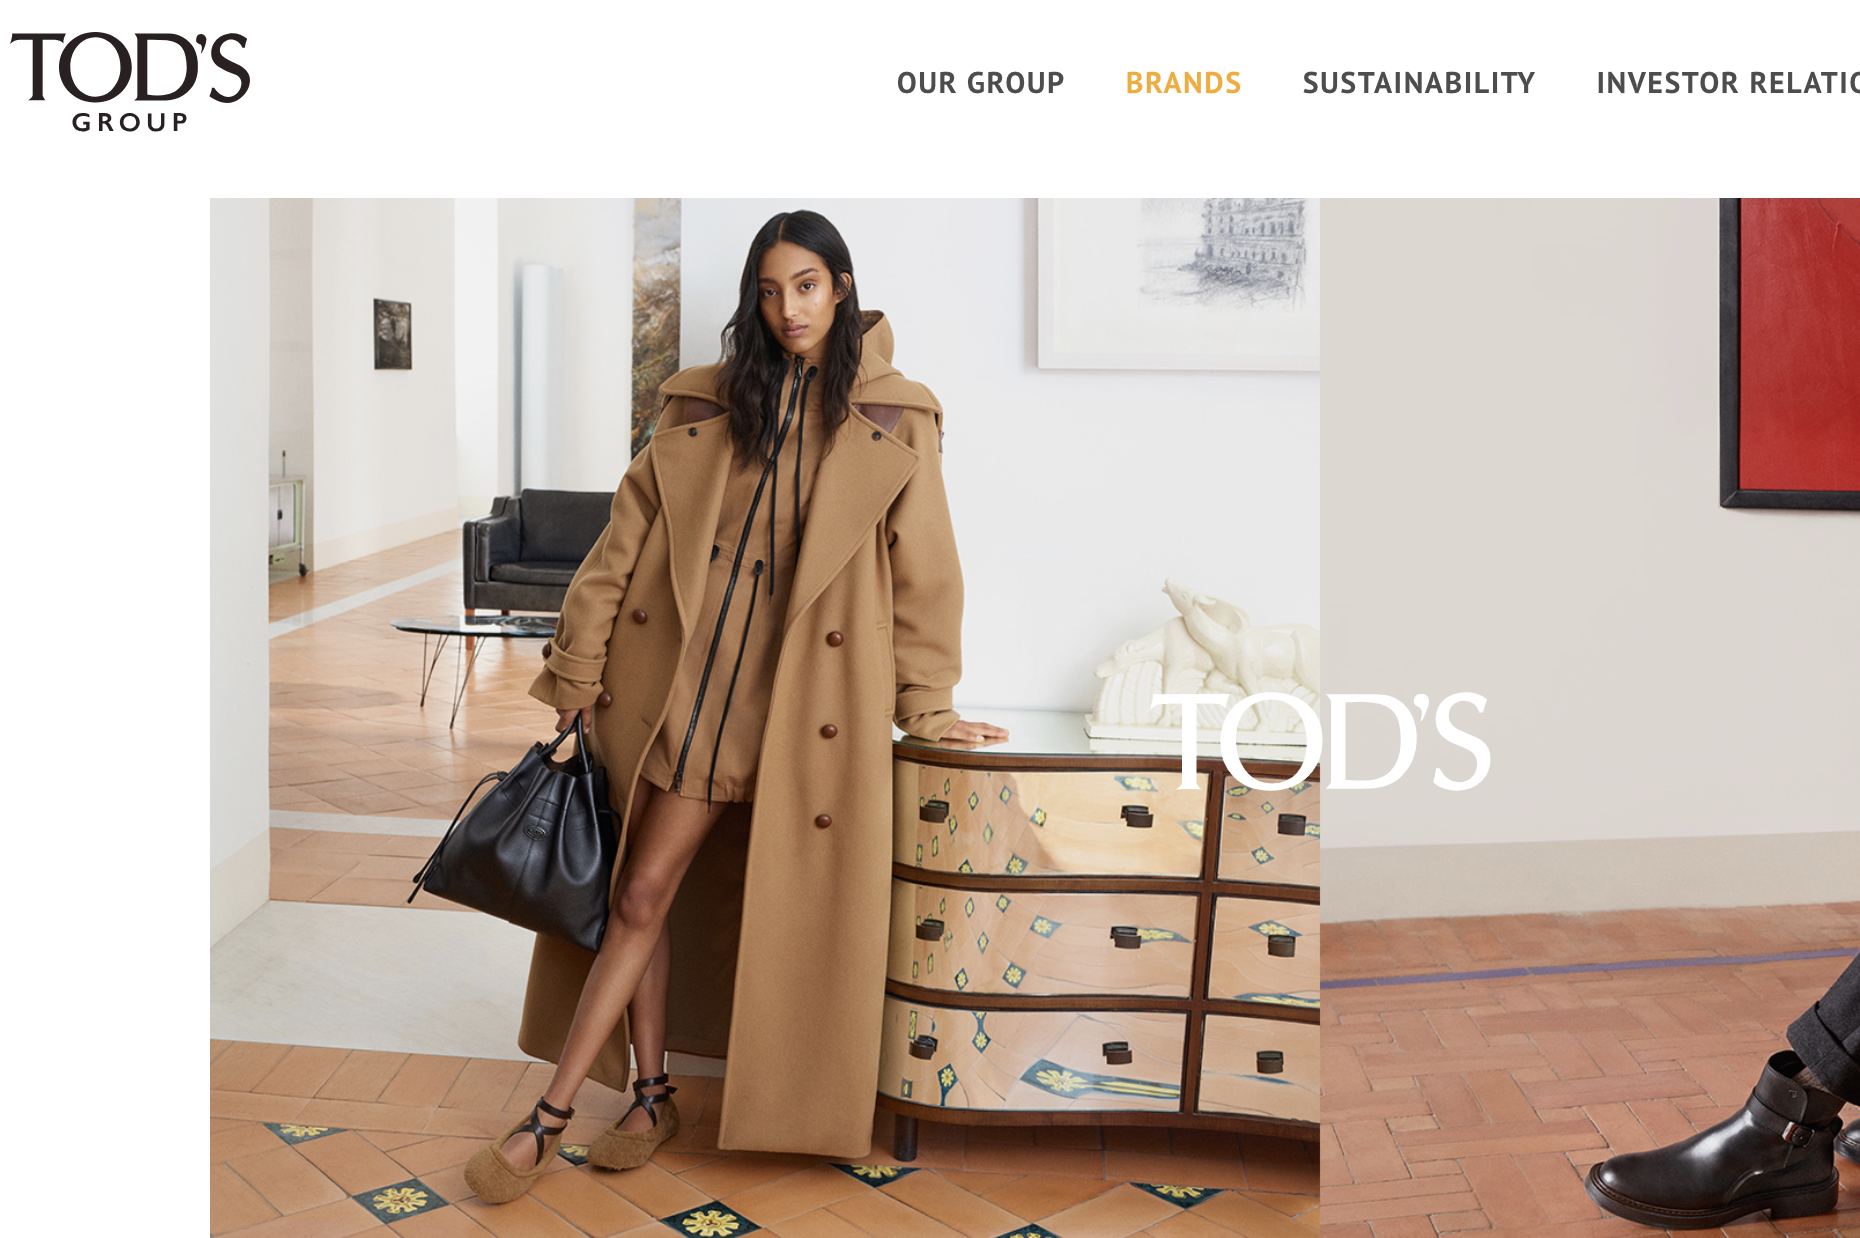 China Market Leads the Way! Tod’s Q3 Sales Up 14.3%